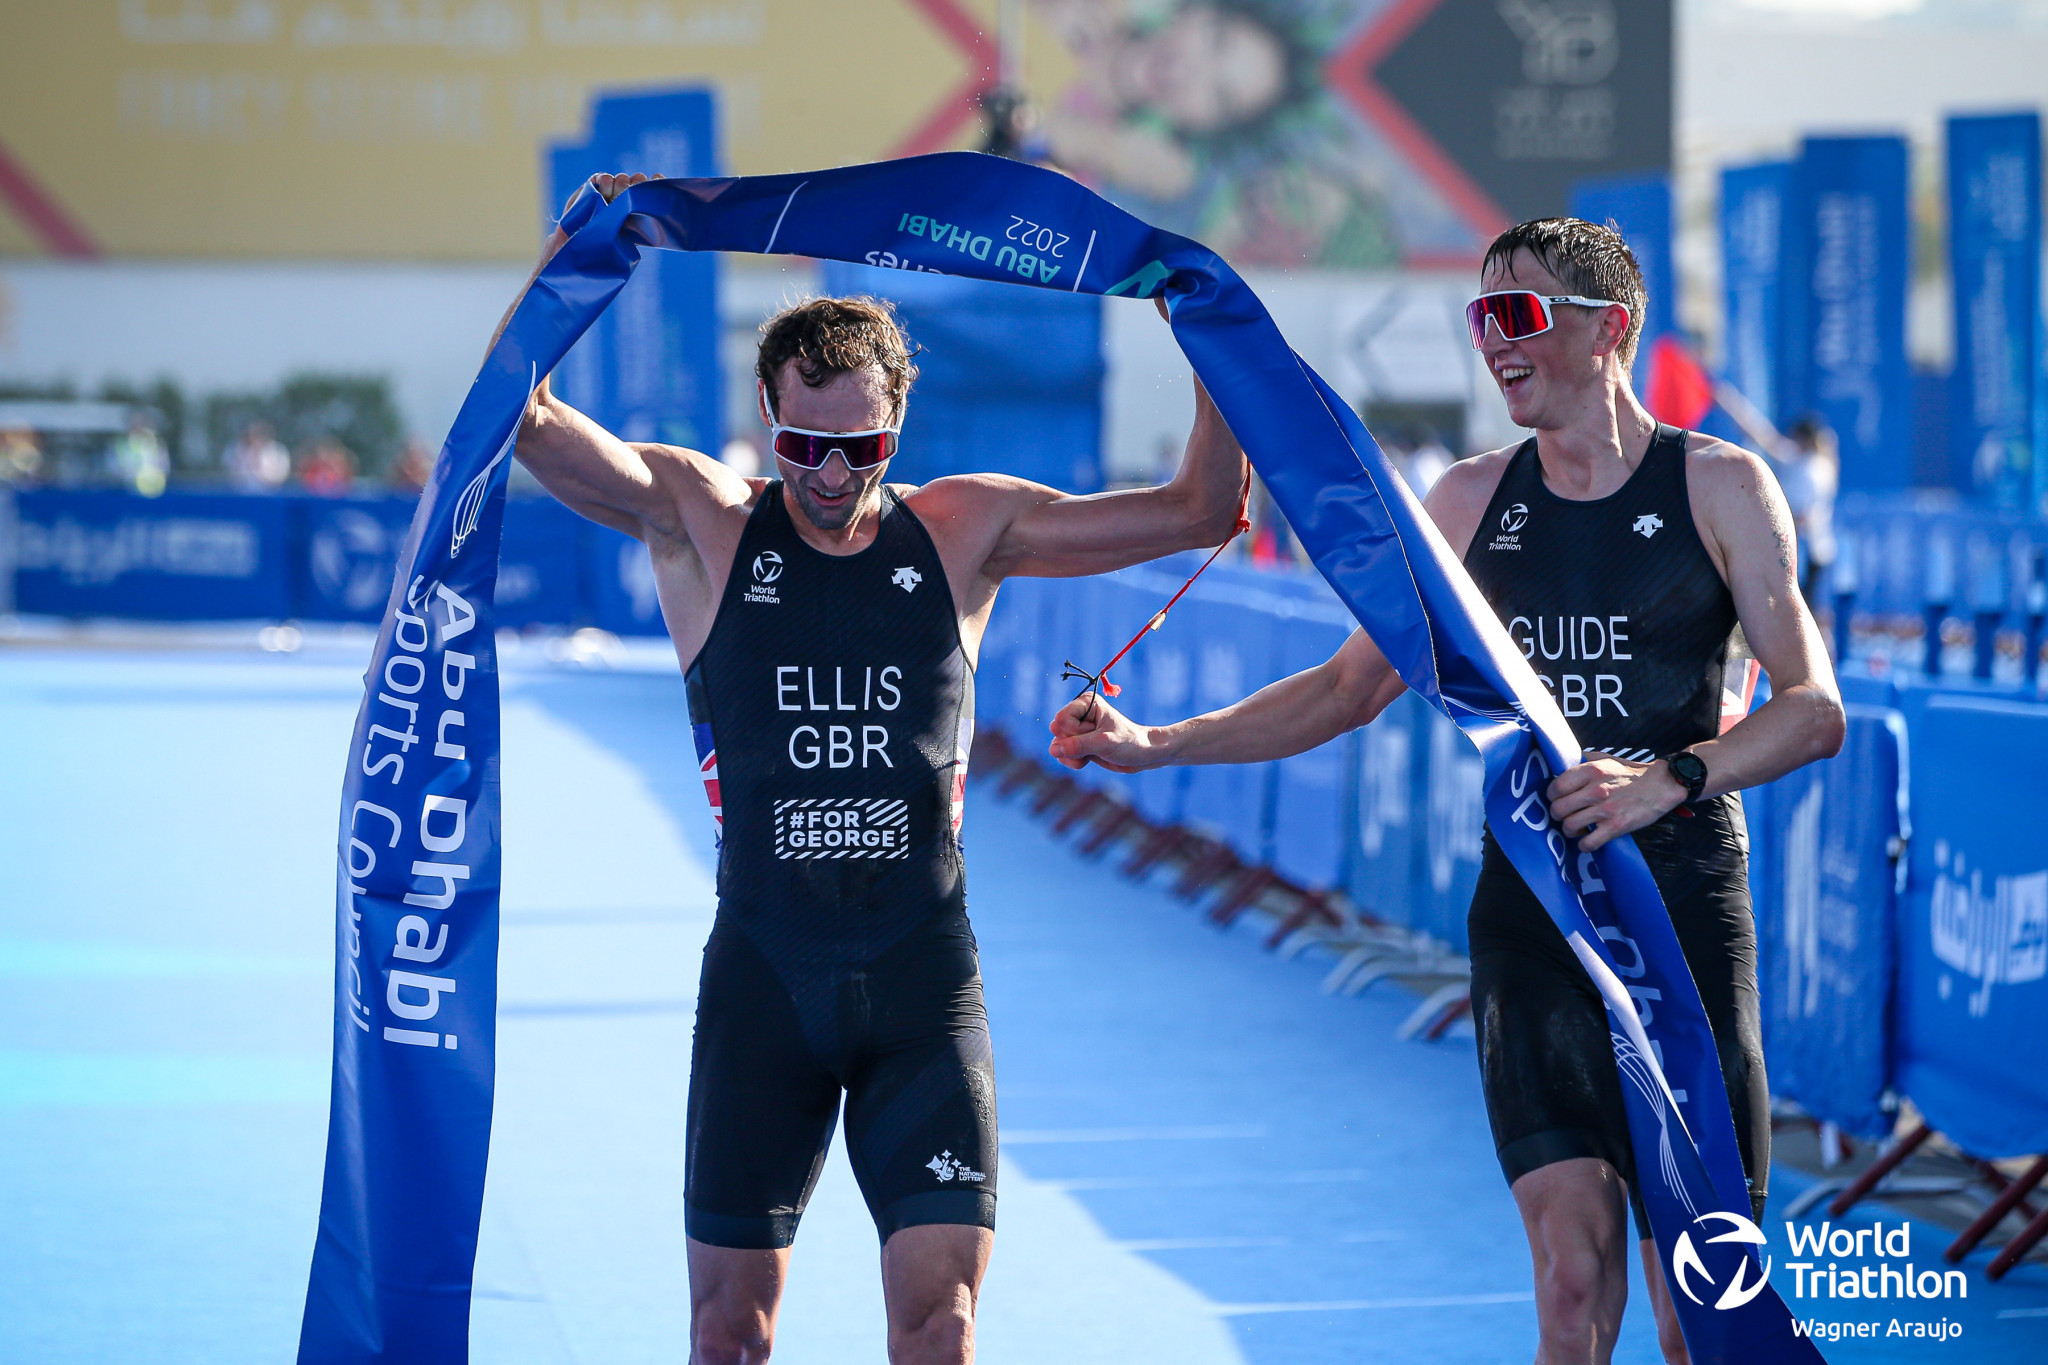 Britain's Dave Ellis, left, took the first gold medal of the day in the men's visually impaired class ©World Triathlon